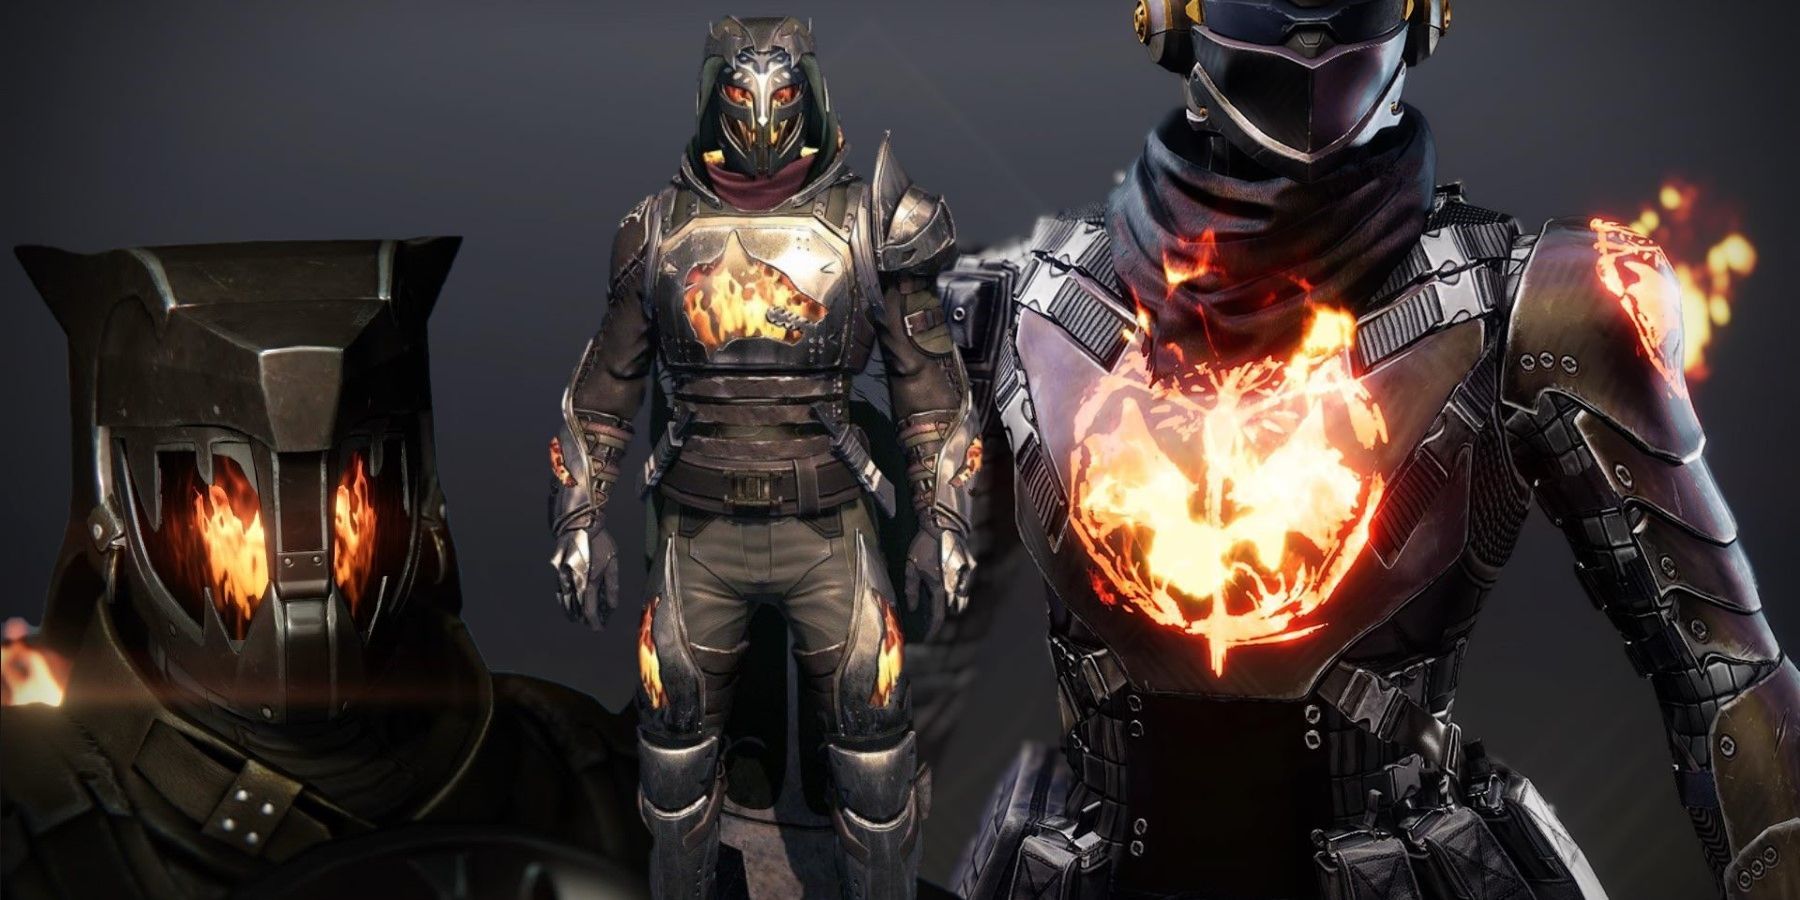 Destiny 2's New Iron Banner Armor Glow Should be Permanent